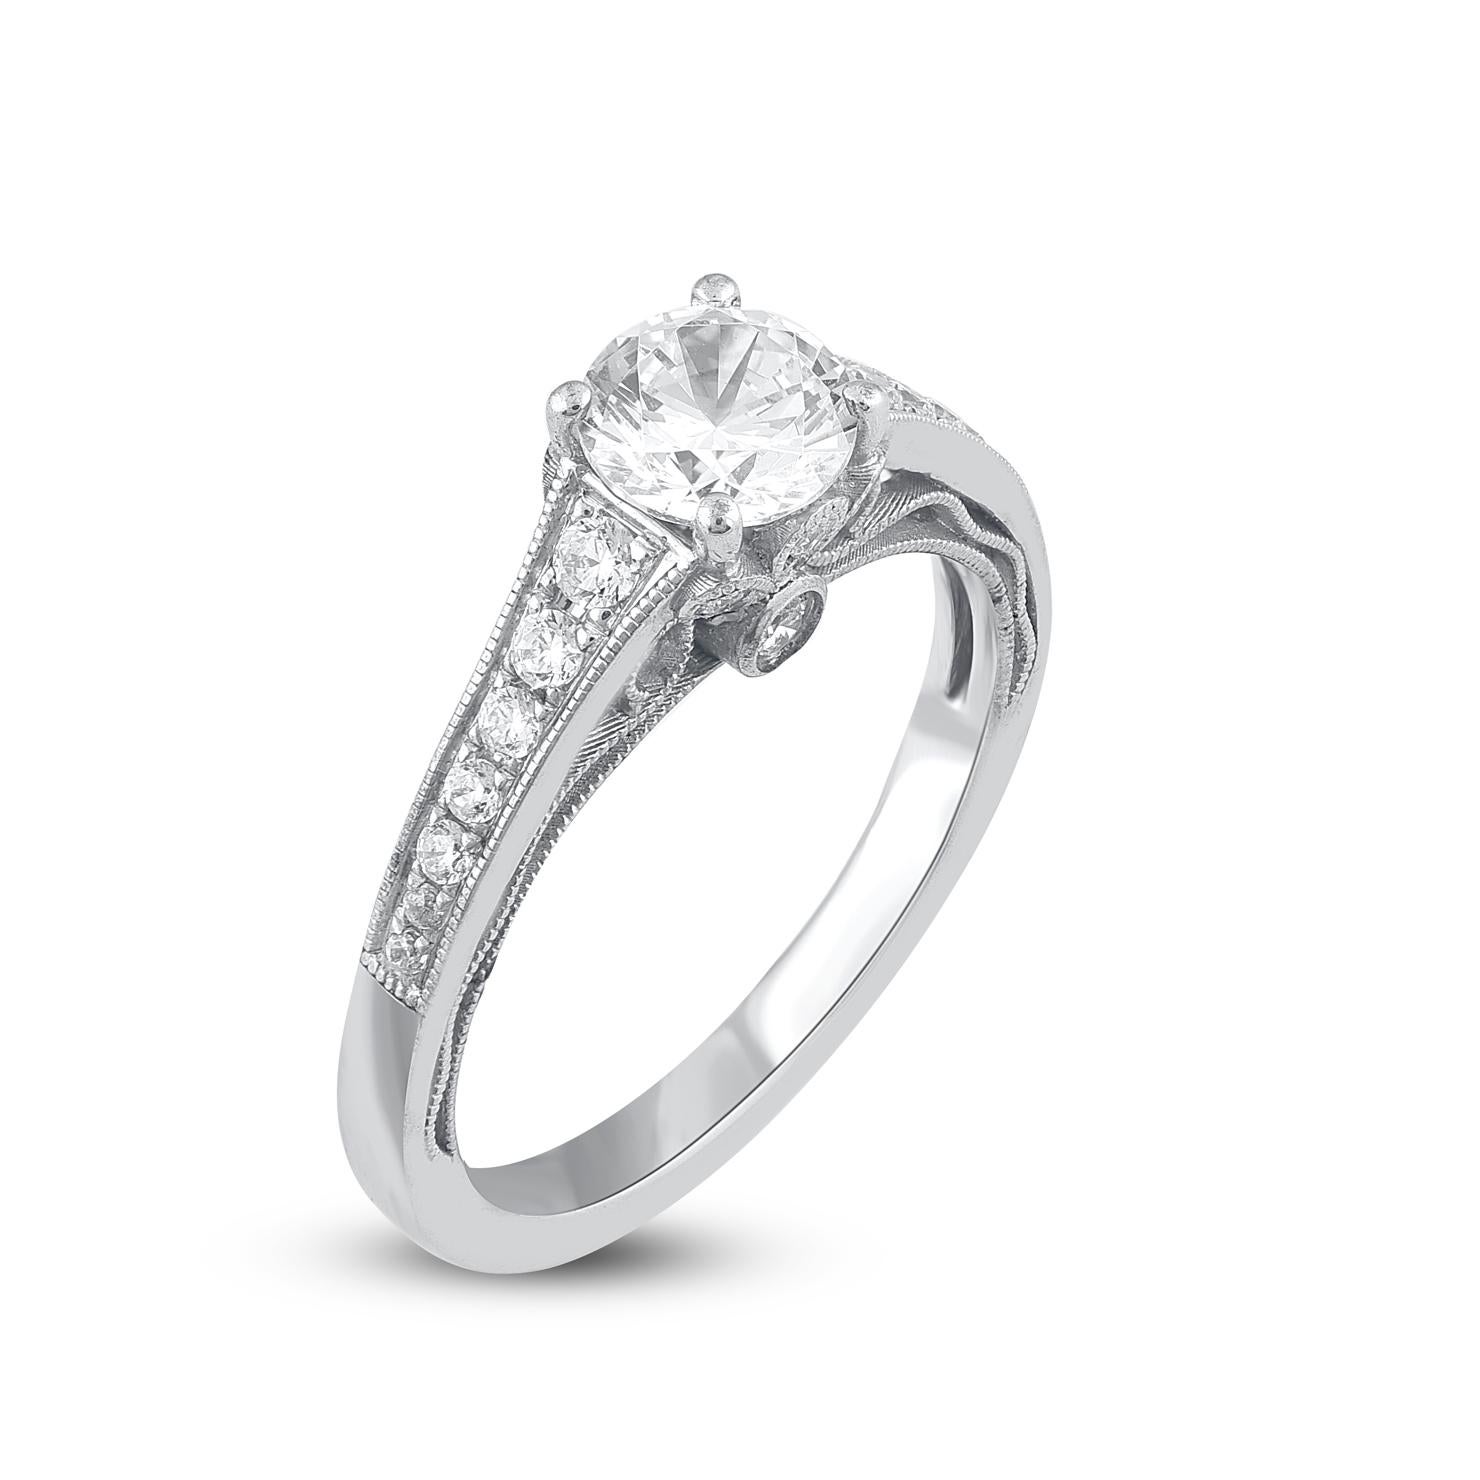 Sparkling with all your wonderful moments, this diamond engagement ring is shining symbol of your commitment. Crafted in 18 karat white gold, this engagement ring features 0.80 ct center stone and 0.313 ct of diamond frame and shank lined diamonds